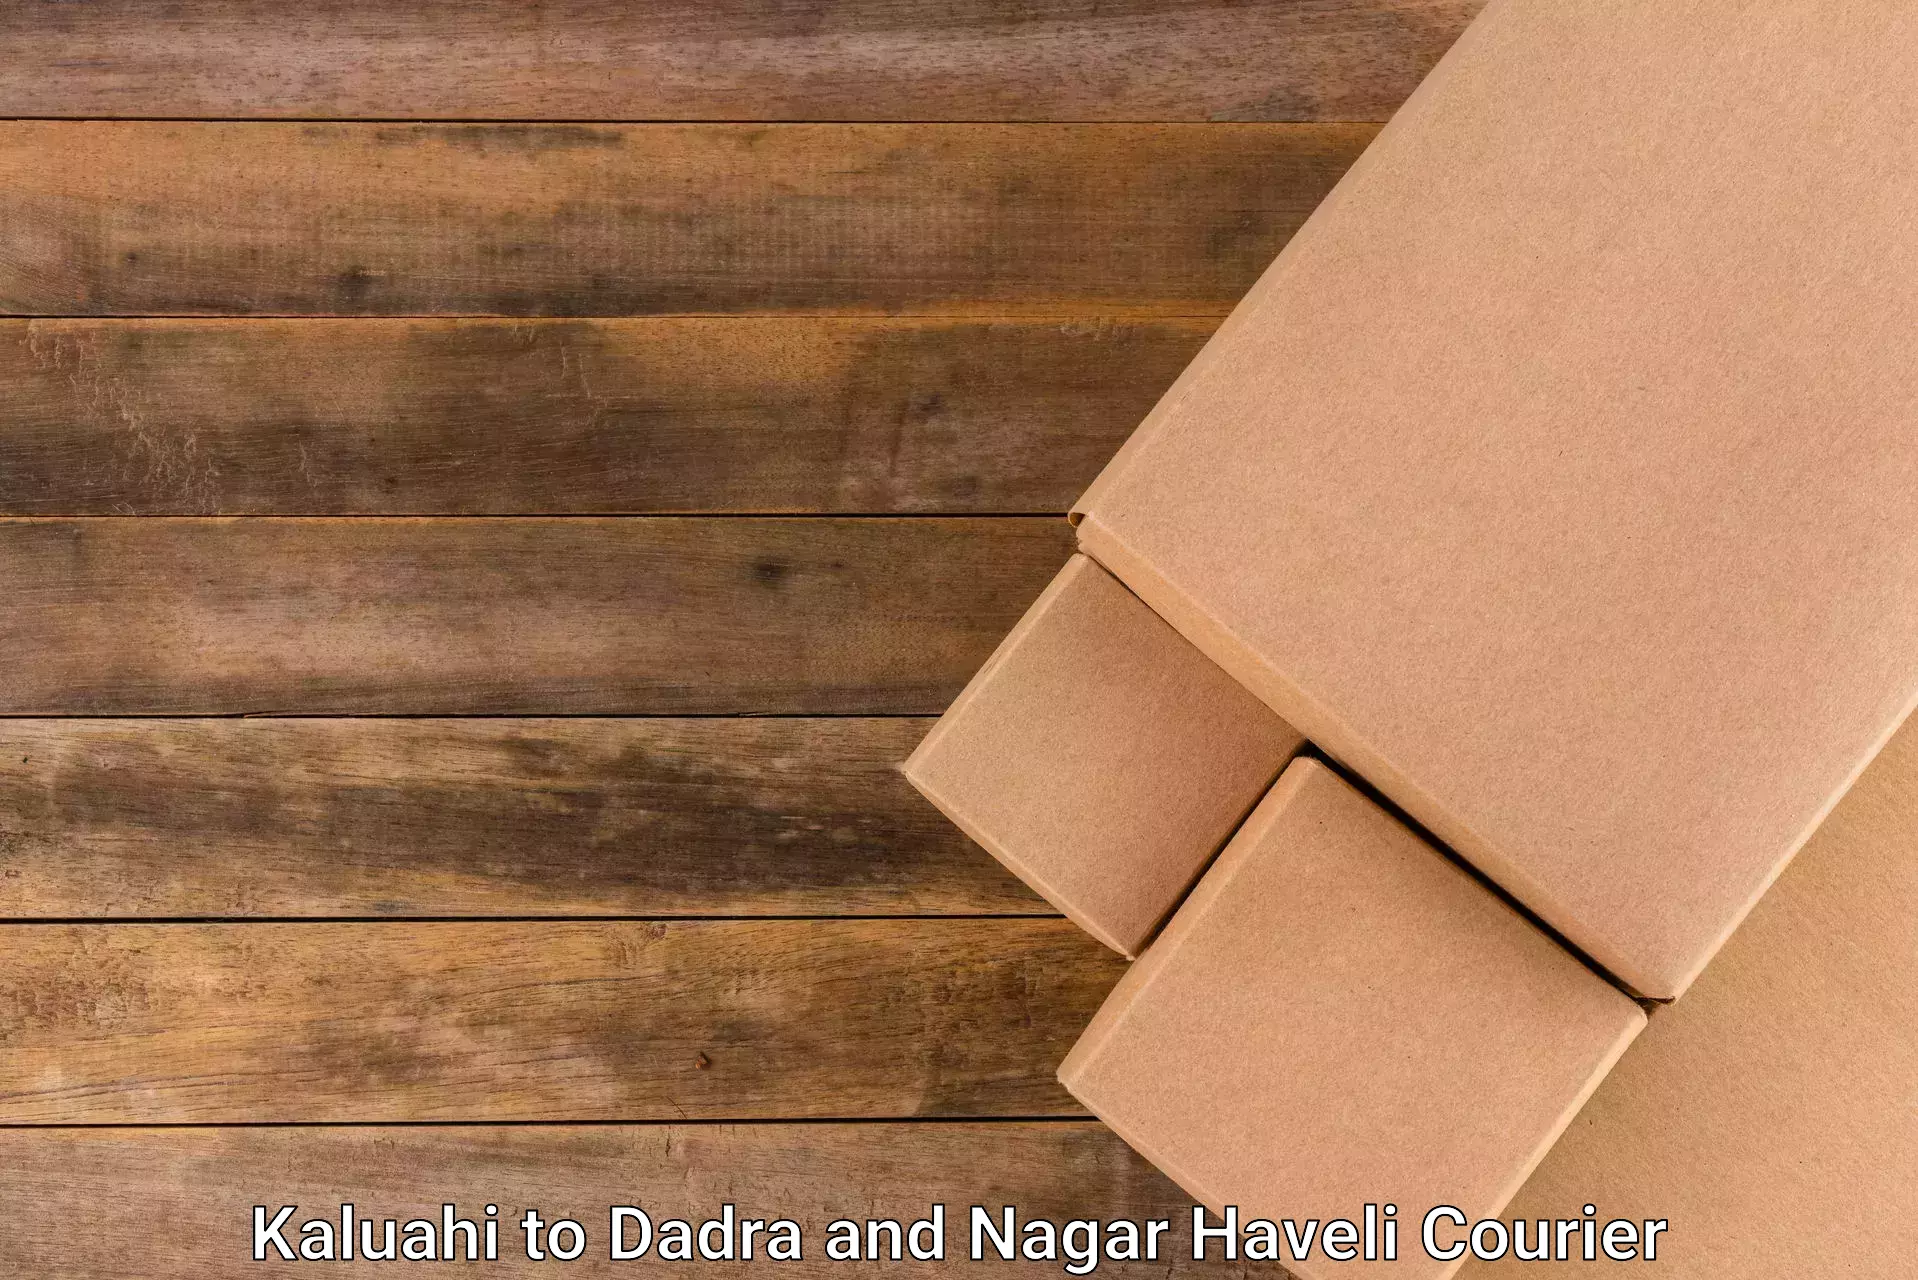 Sustainable courier practices Kaluahi to Dadra and Nagar Haveli